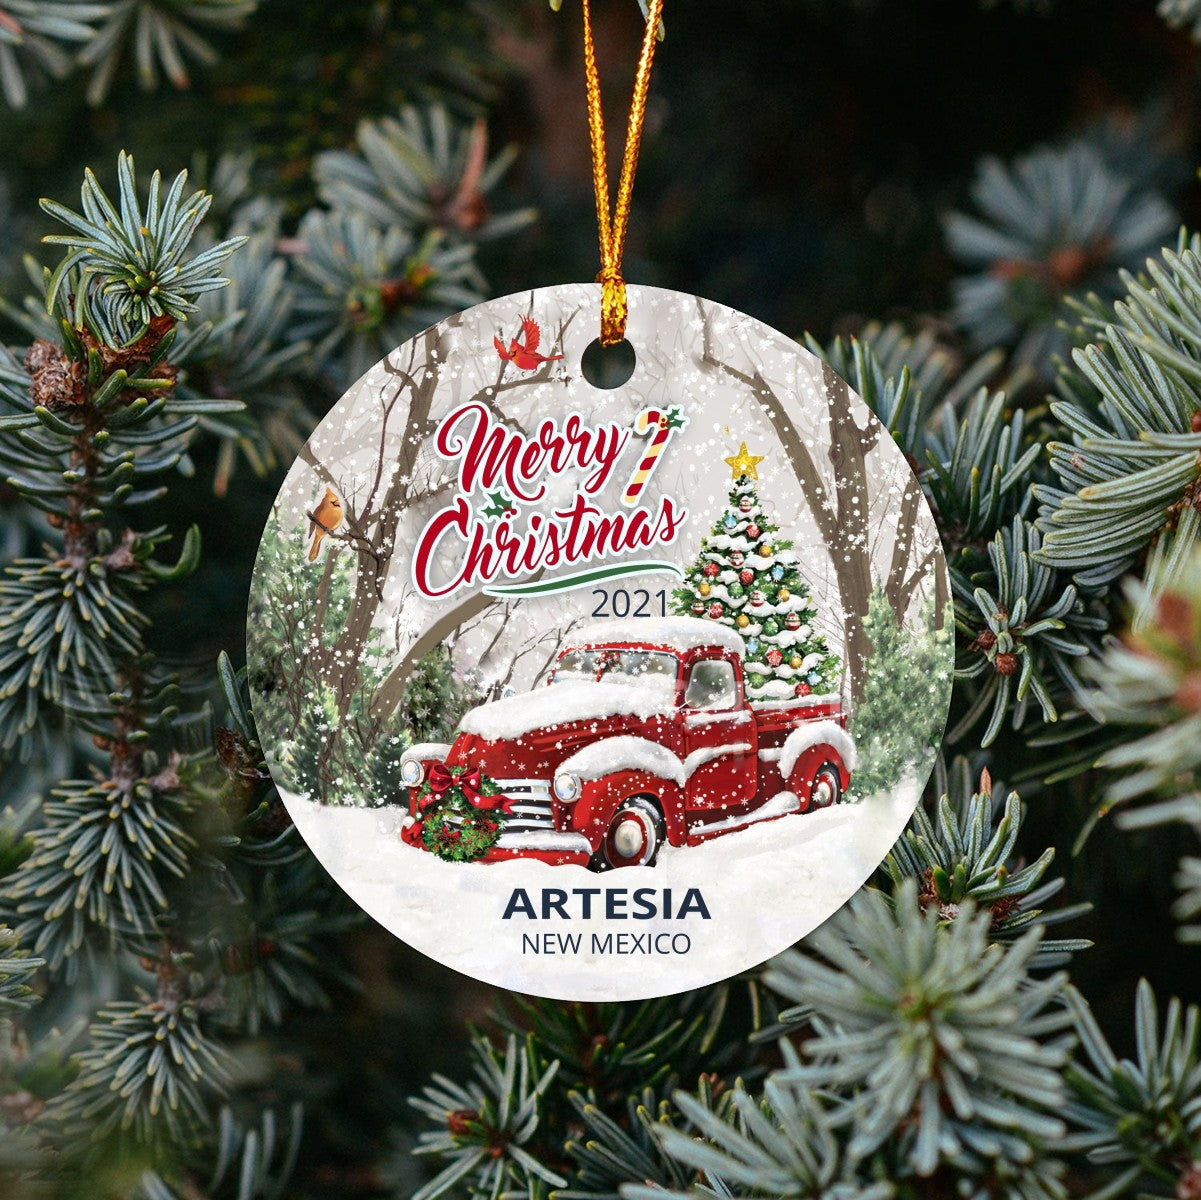 Christmas Tree Ornaments Artesia - Ornament With Name City, State Artesia New Mexico NM Ornament - Red Truck Xmas Ornaments 3'' Plastic Gift For Family, Friend And Housewarming